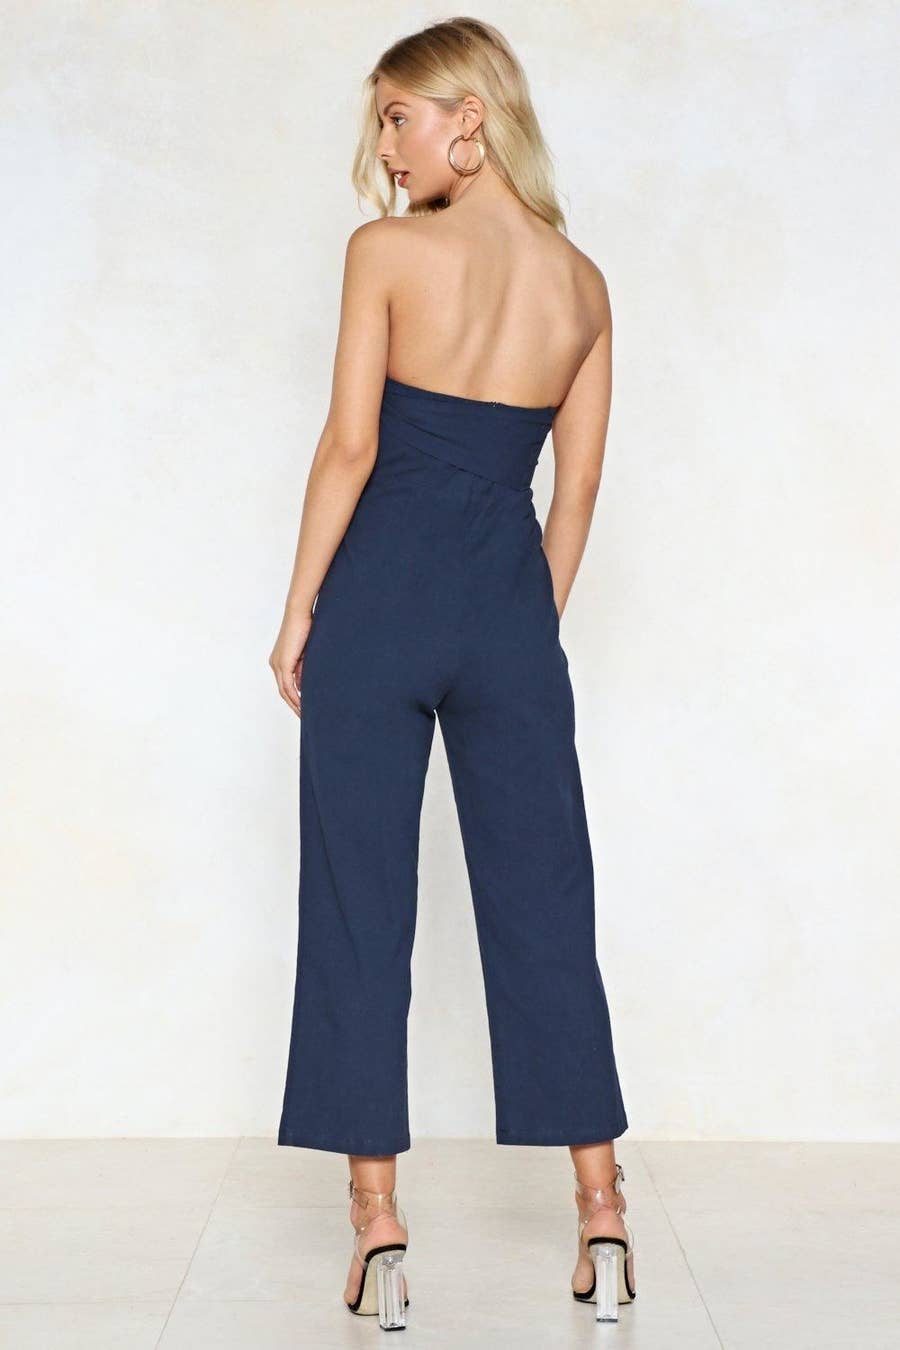 The Wide Leg Jumpsuit You'll Want to Trade Your Favorite Dress For